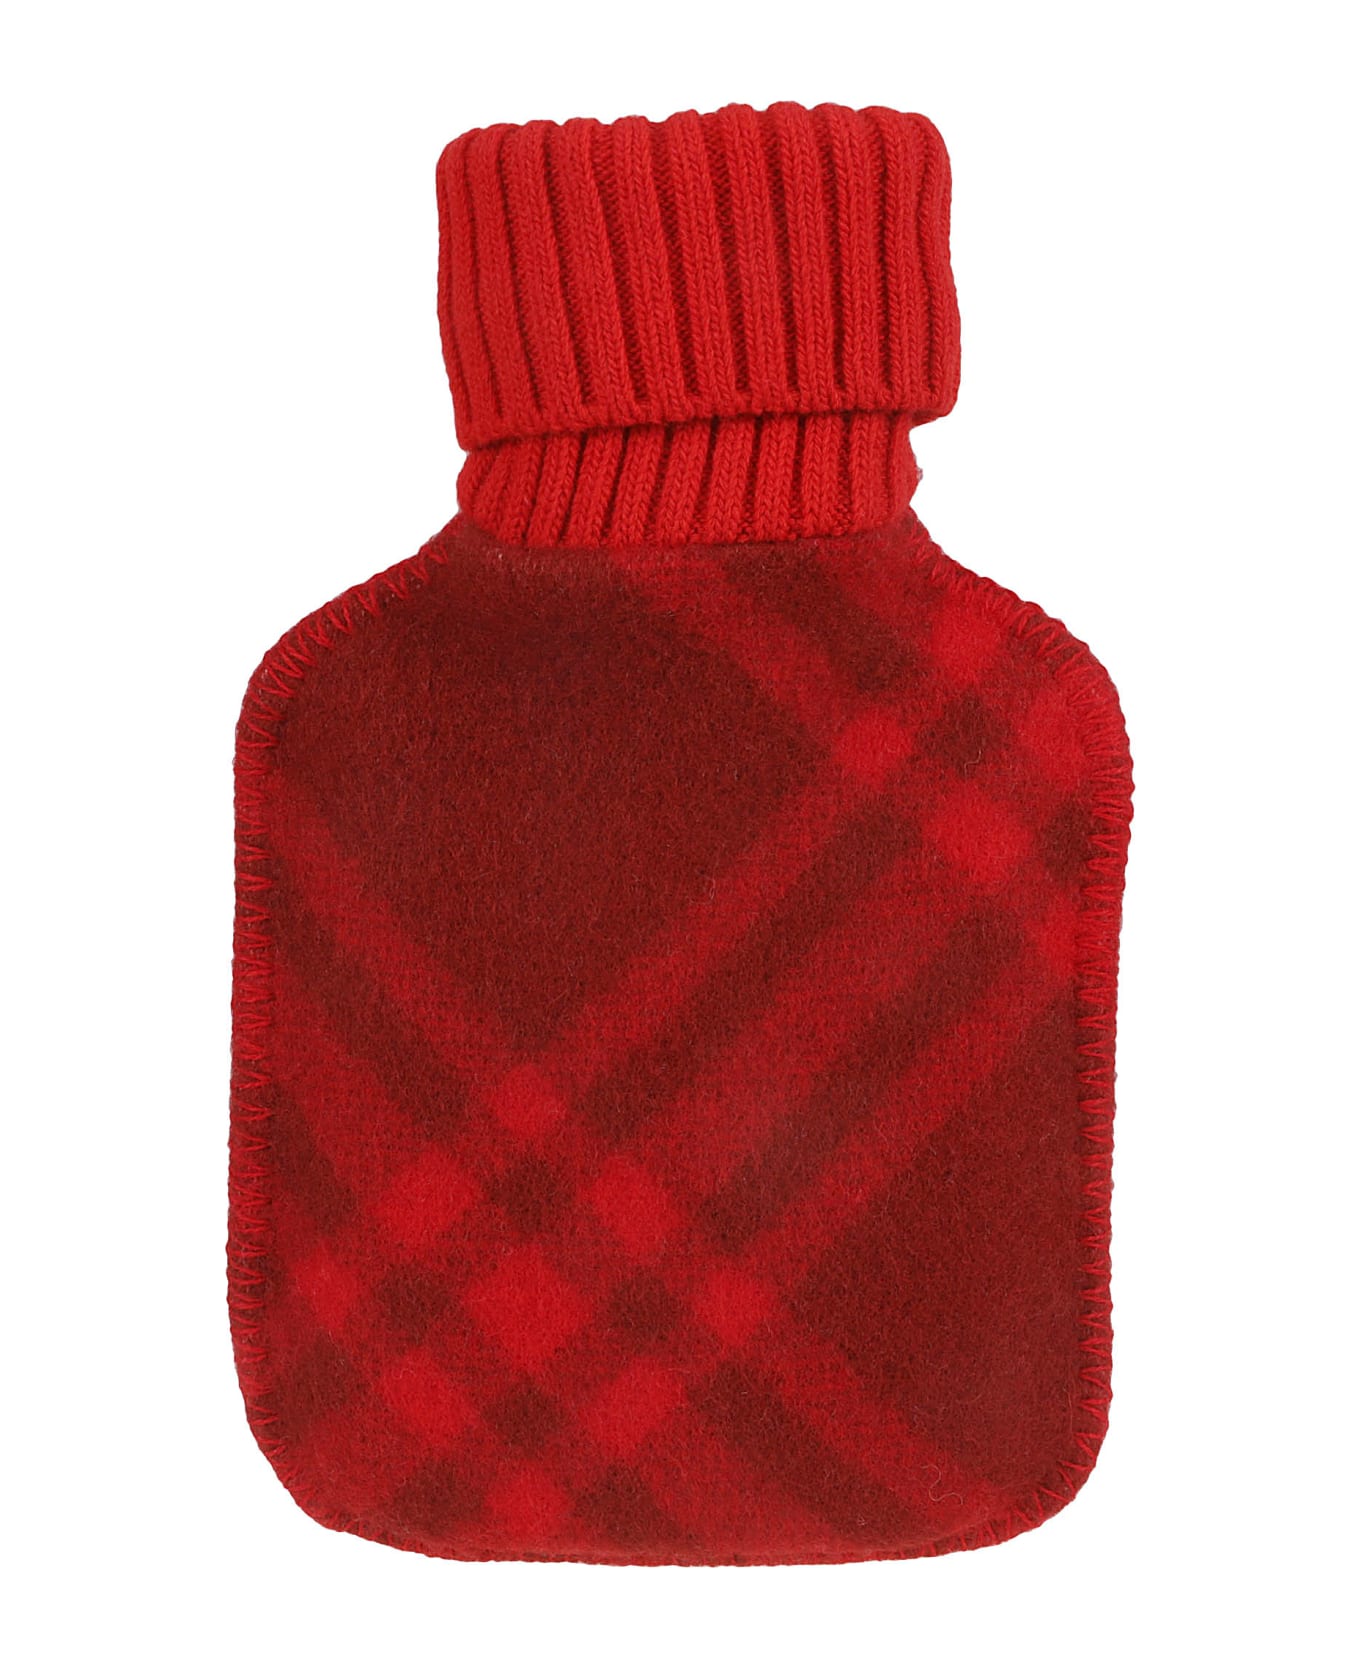 Burberry Cool Check Hot Water Bottle - RIPPLE アクセサリー